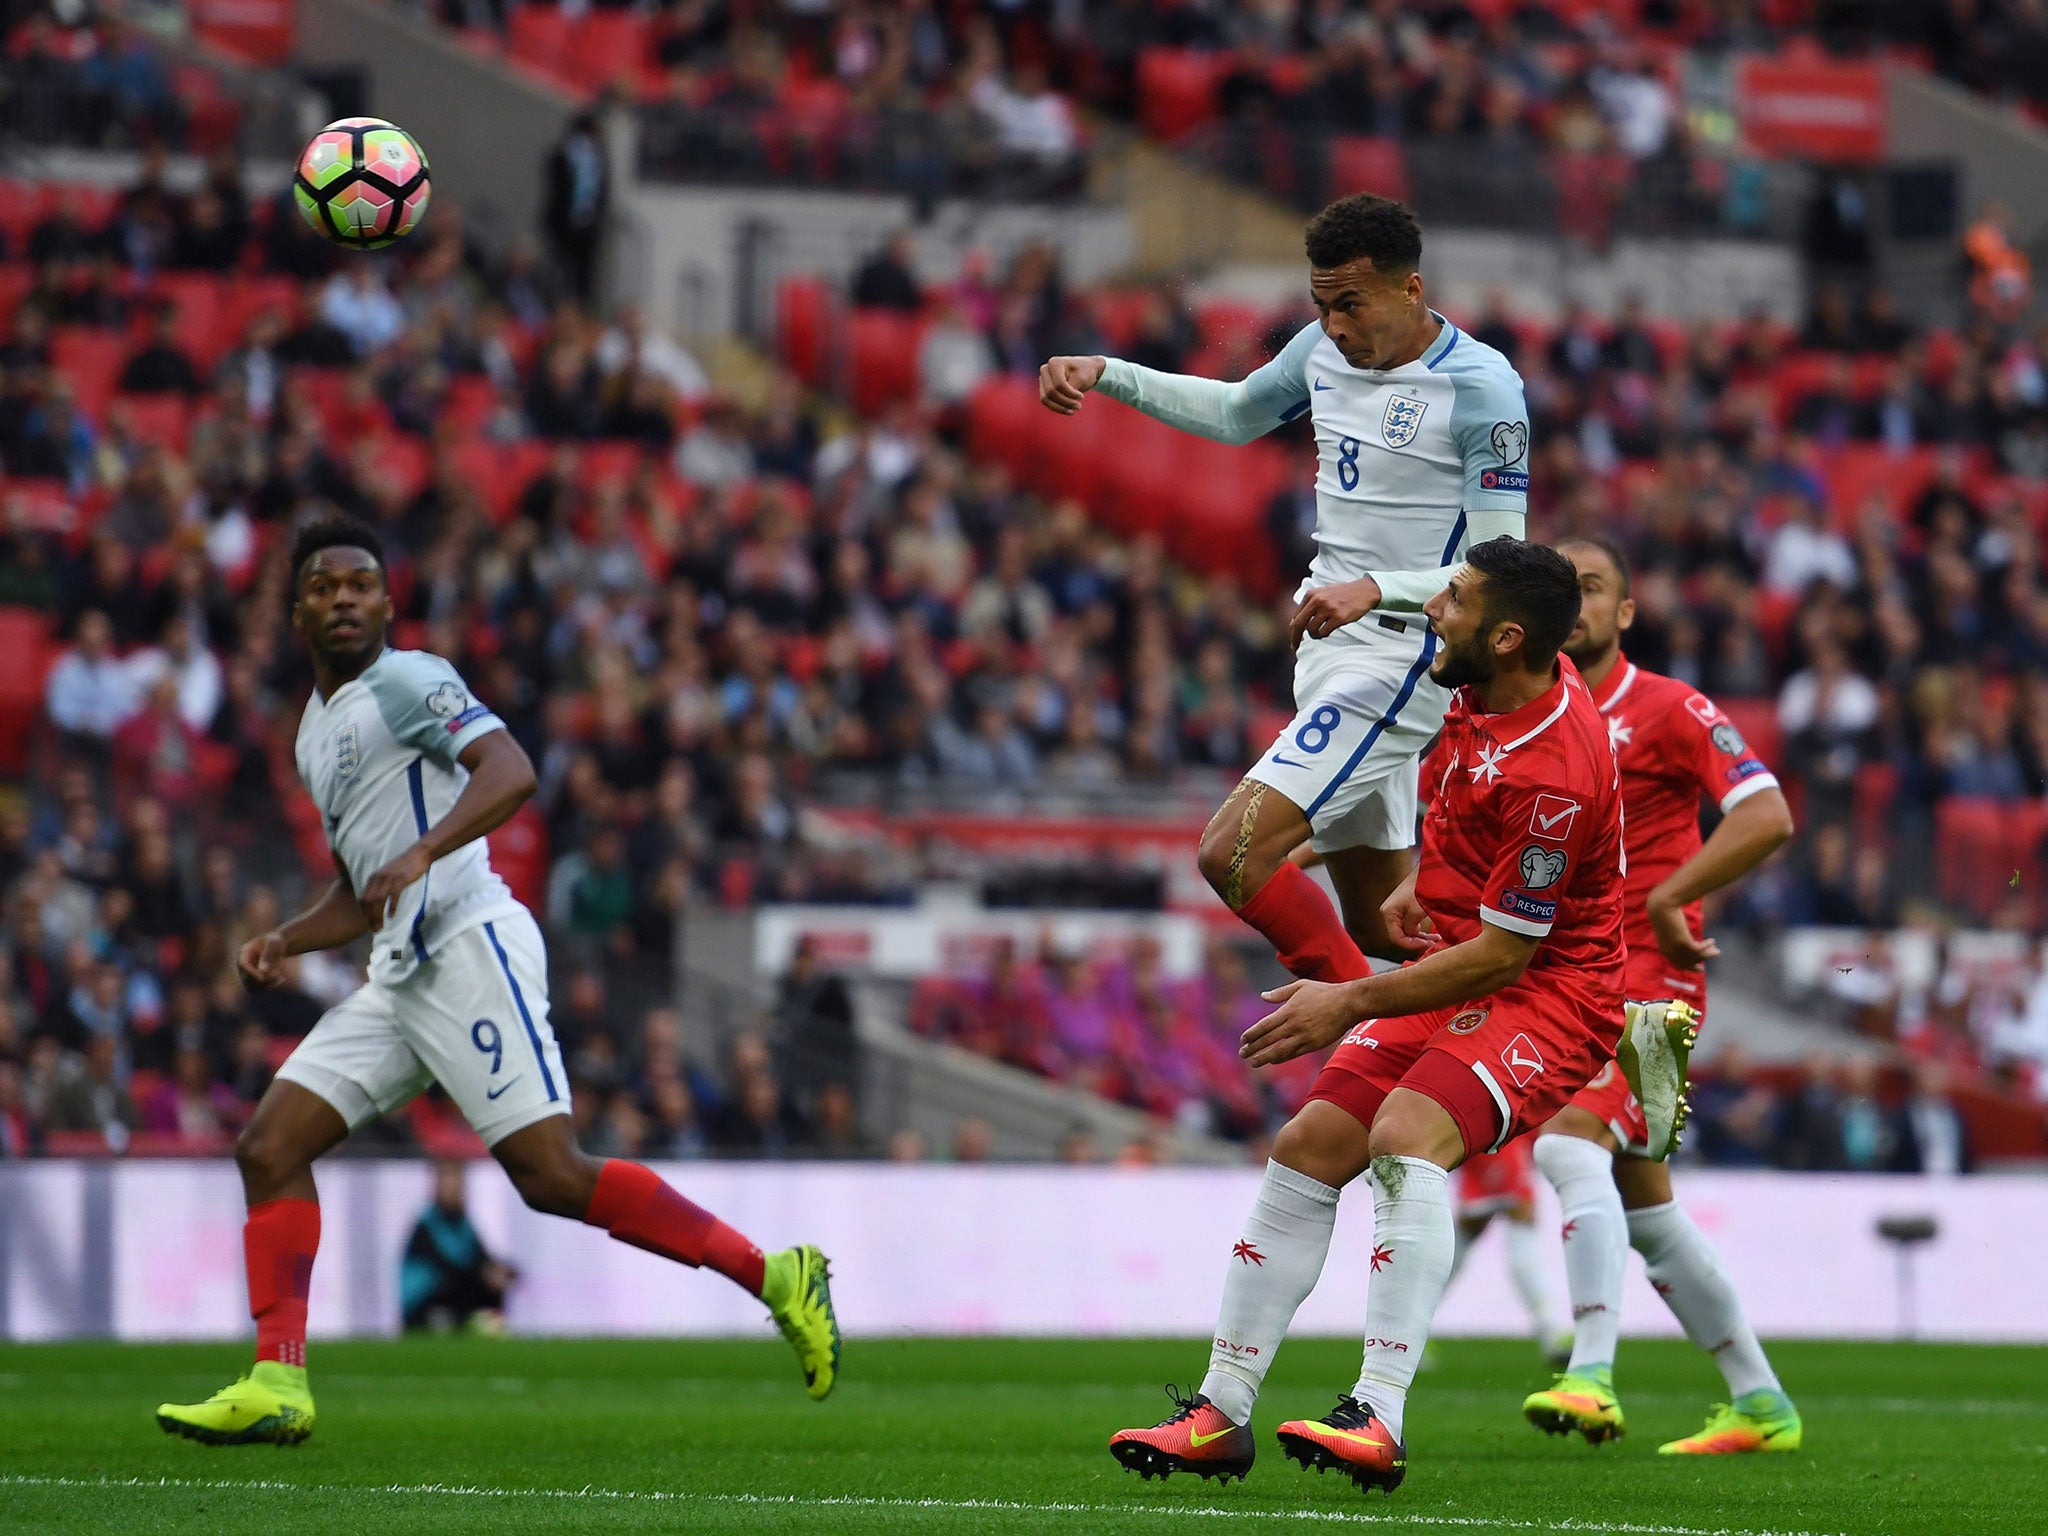 Dele Alli rises highest to give the home side a chance